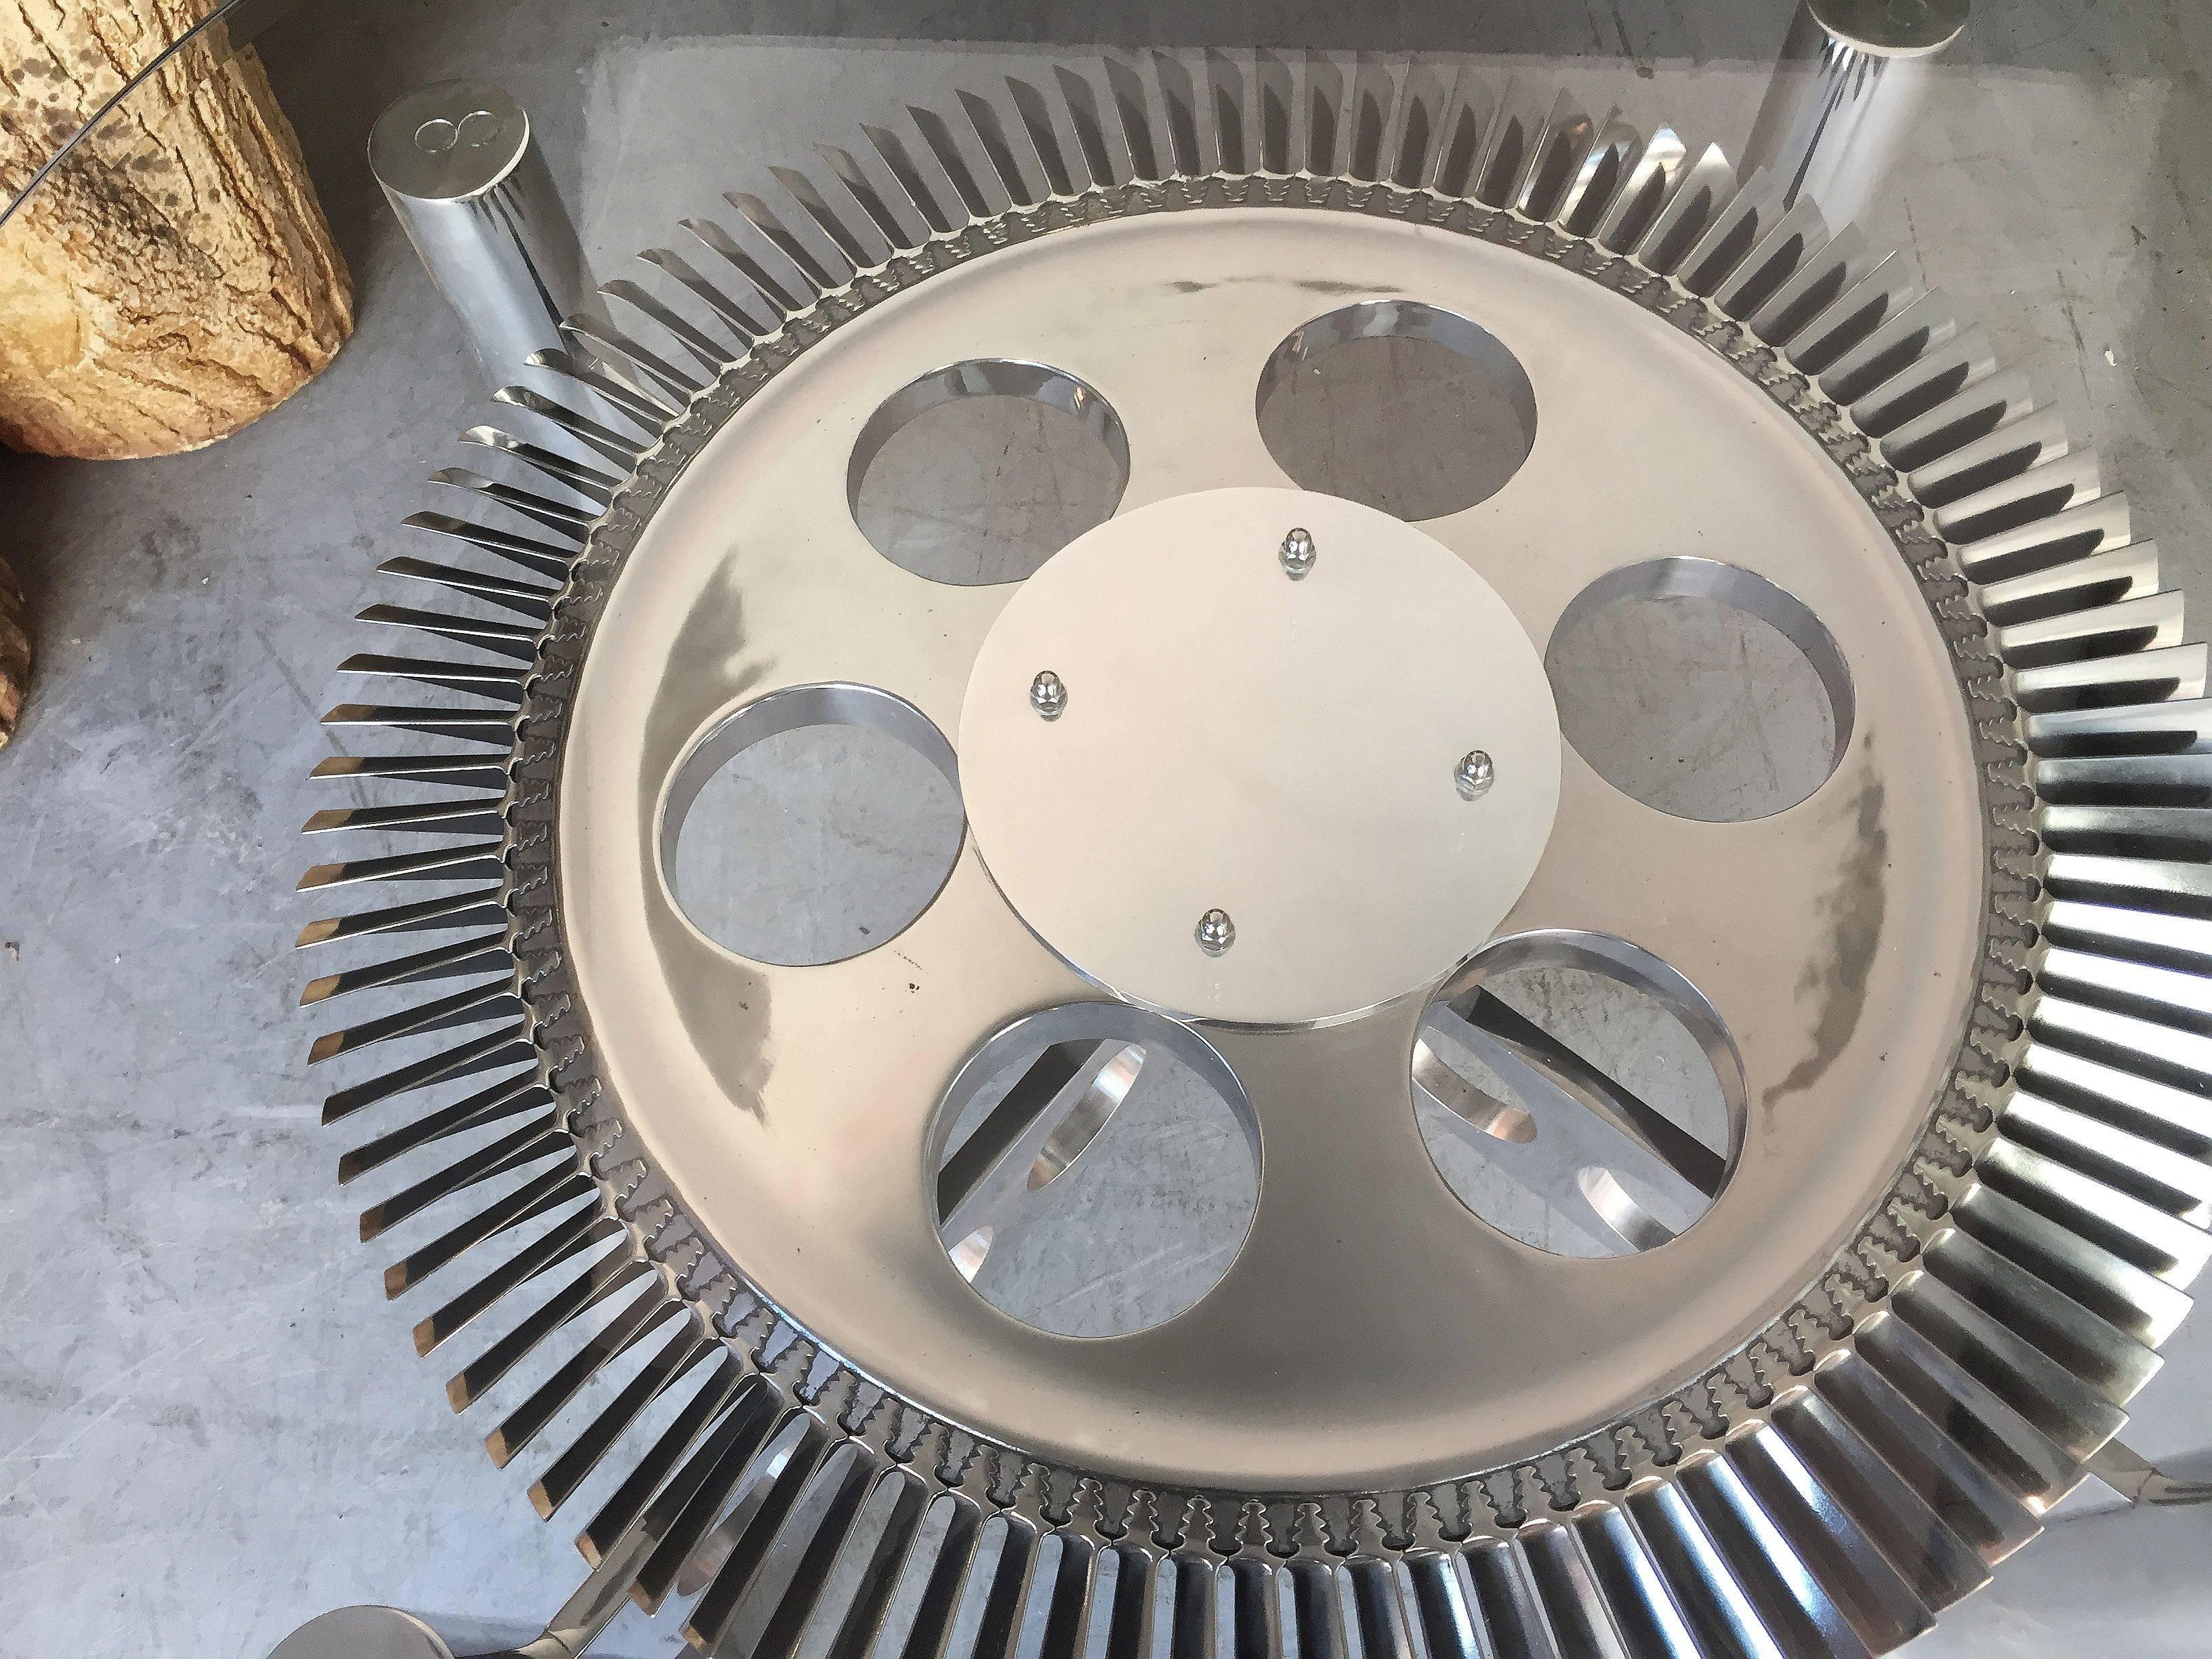 Contemporary Rolls Royce Jet Engine Impeller Low Table from England